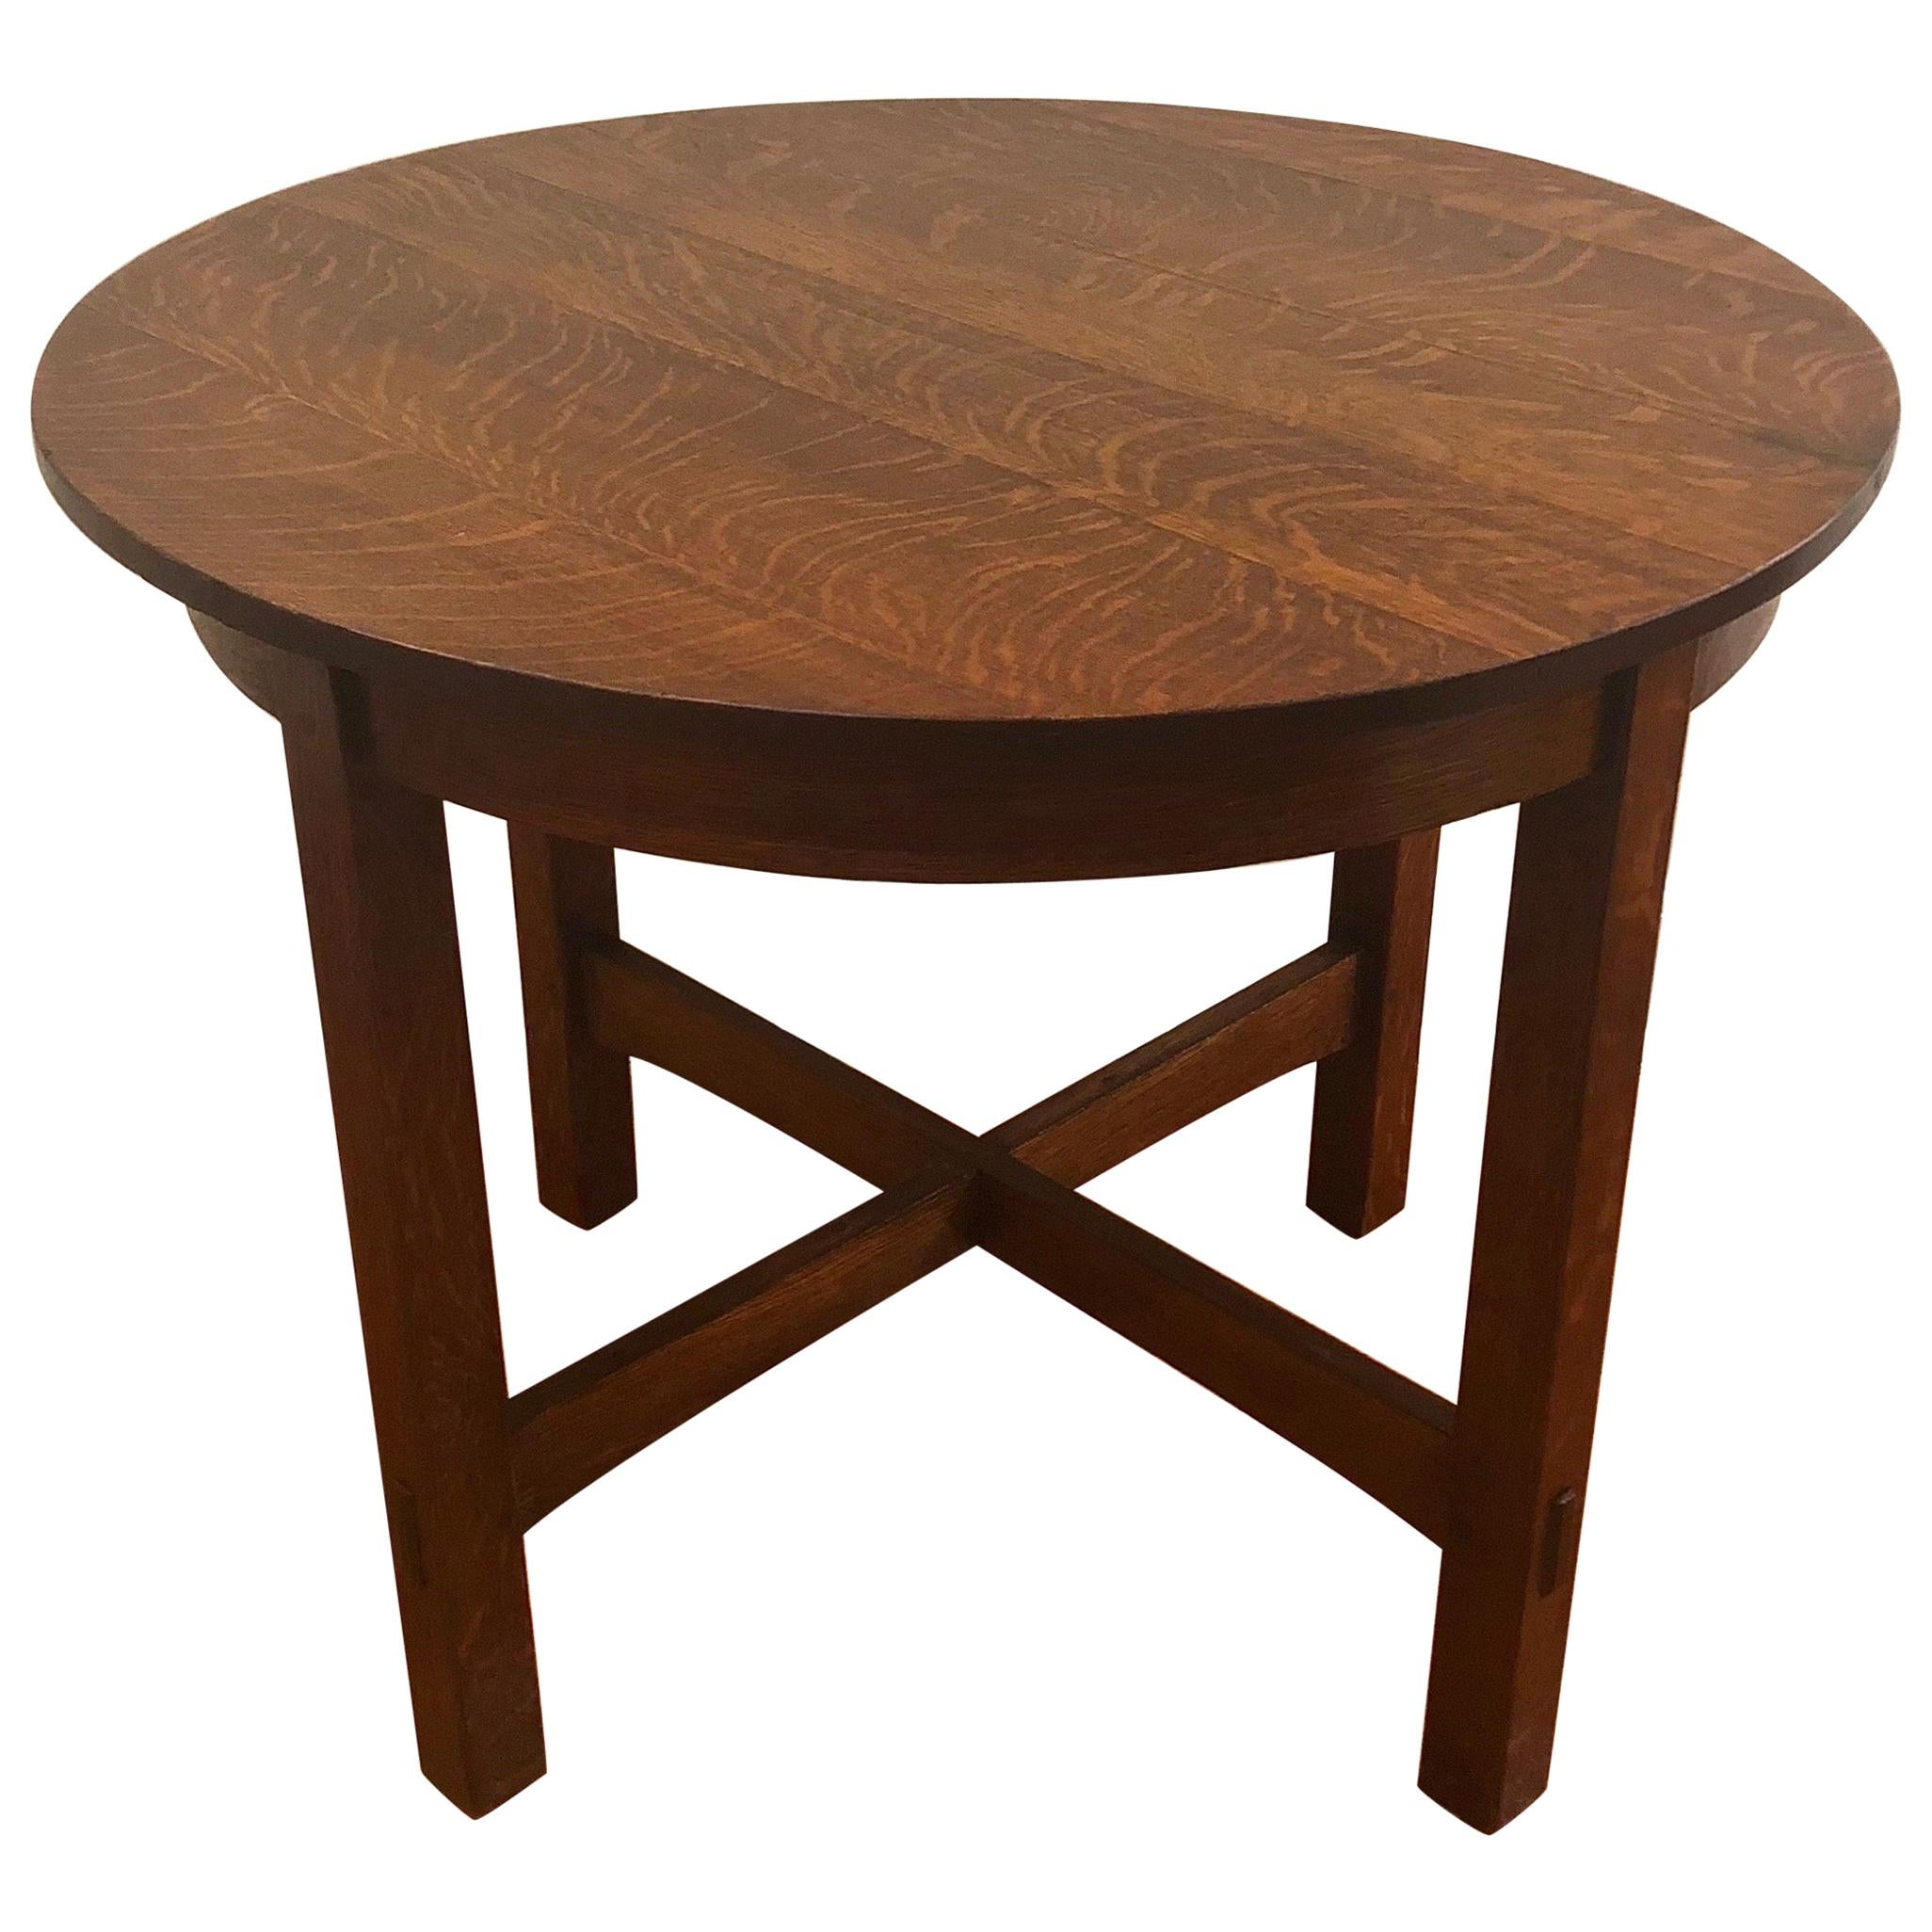 Oak Center or Dining Table by Stickley, USA C. 1910